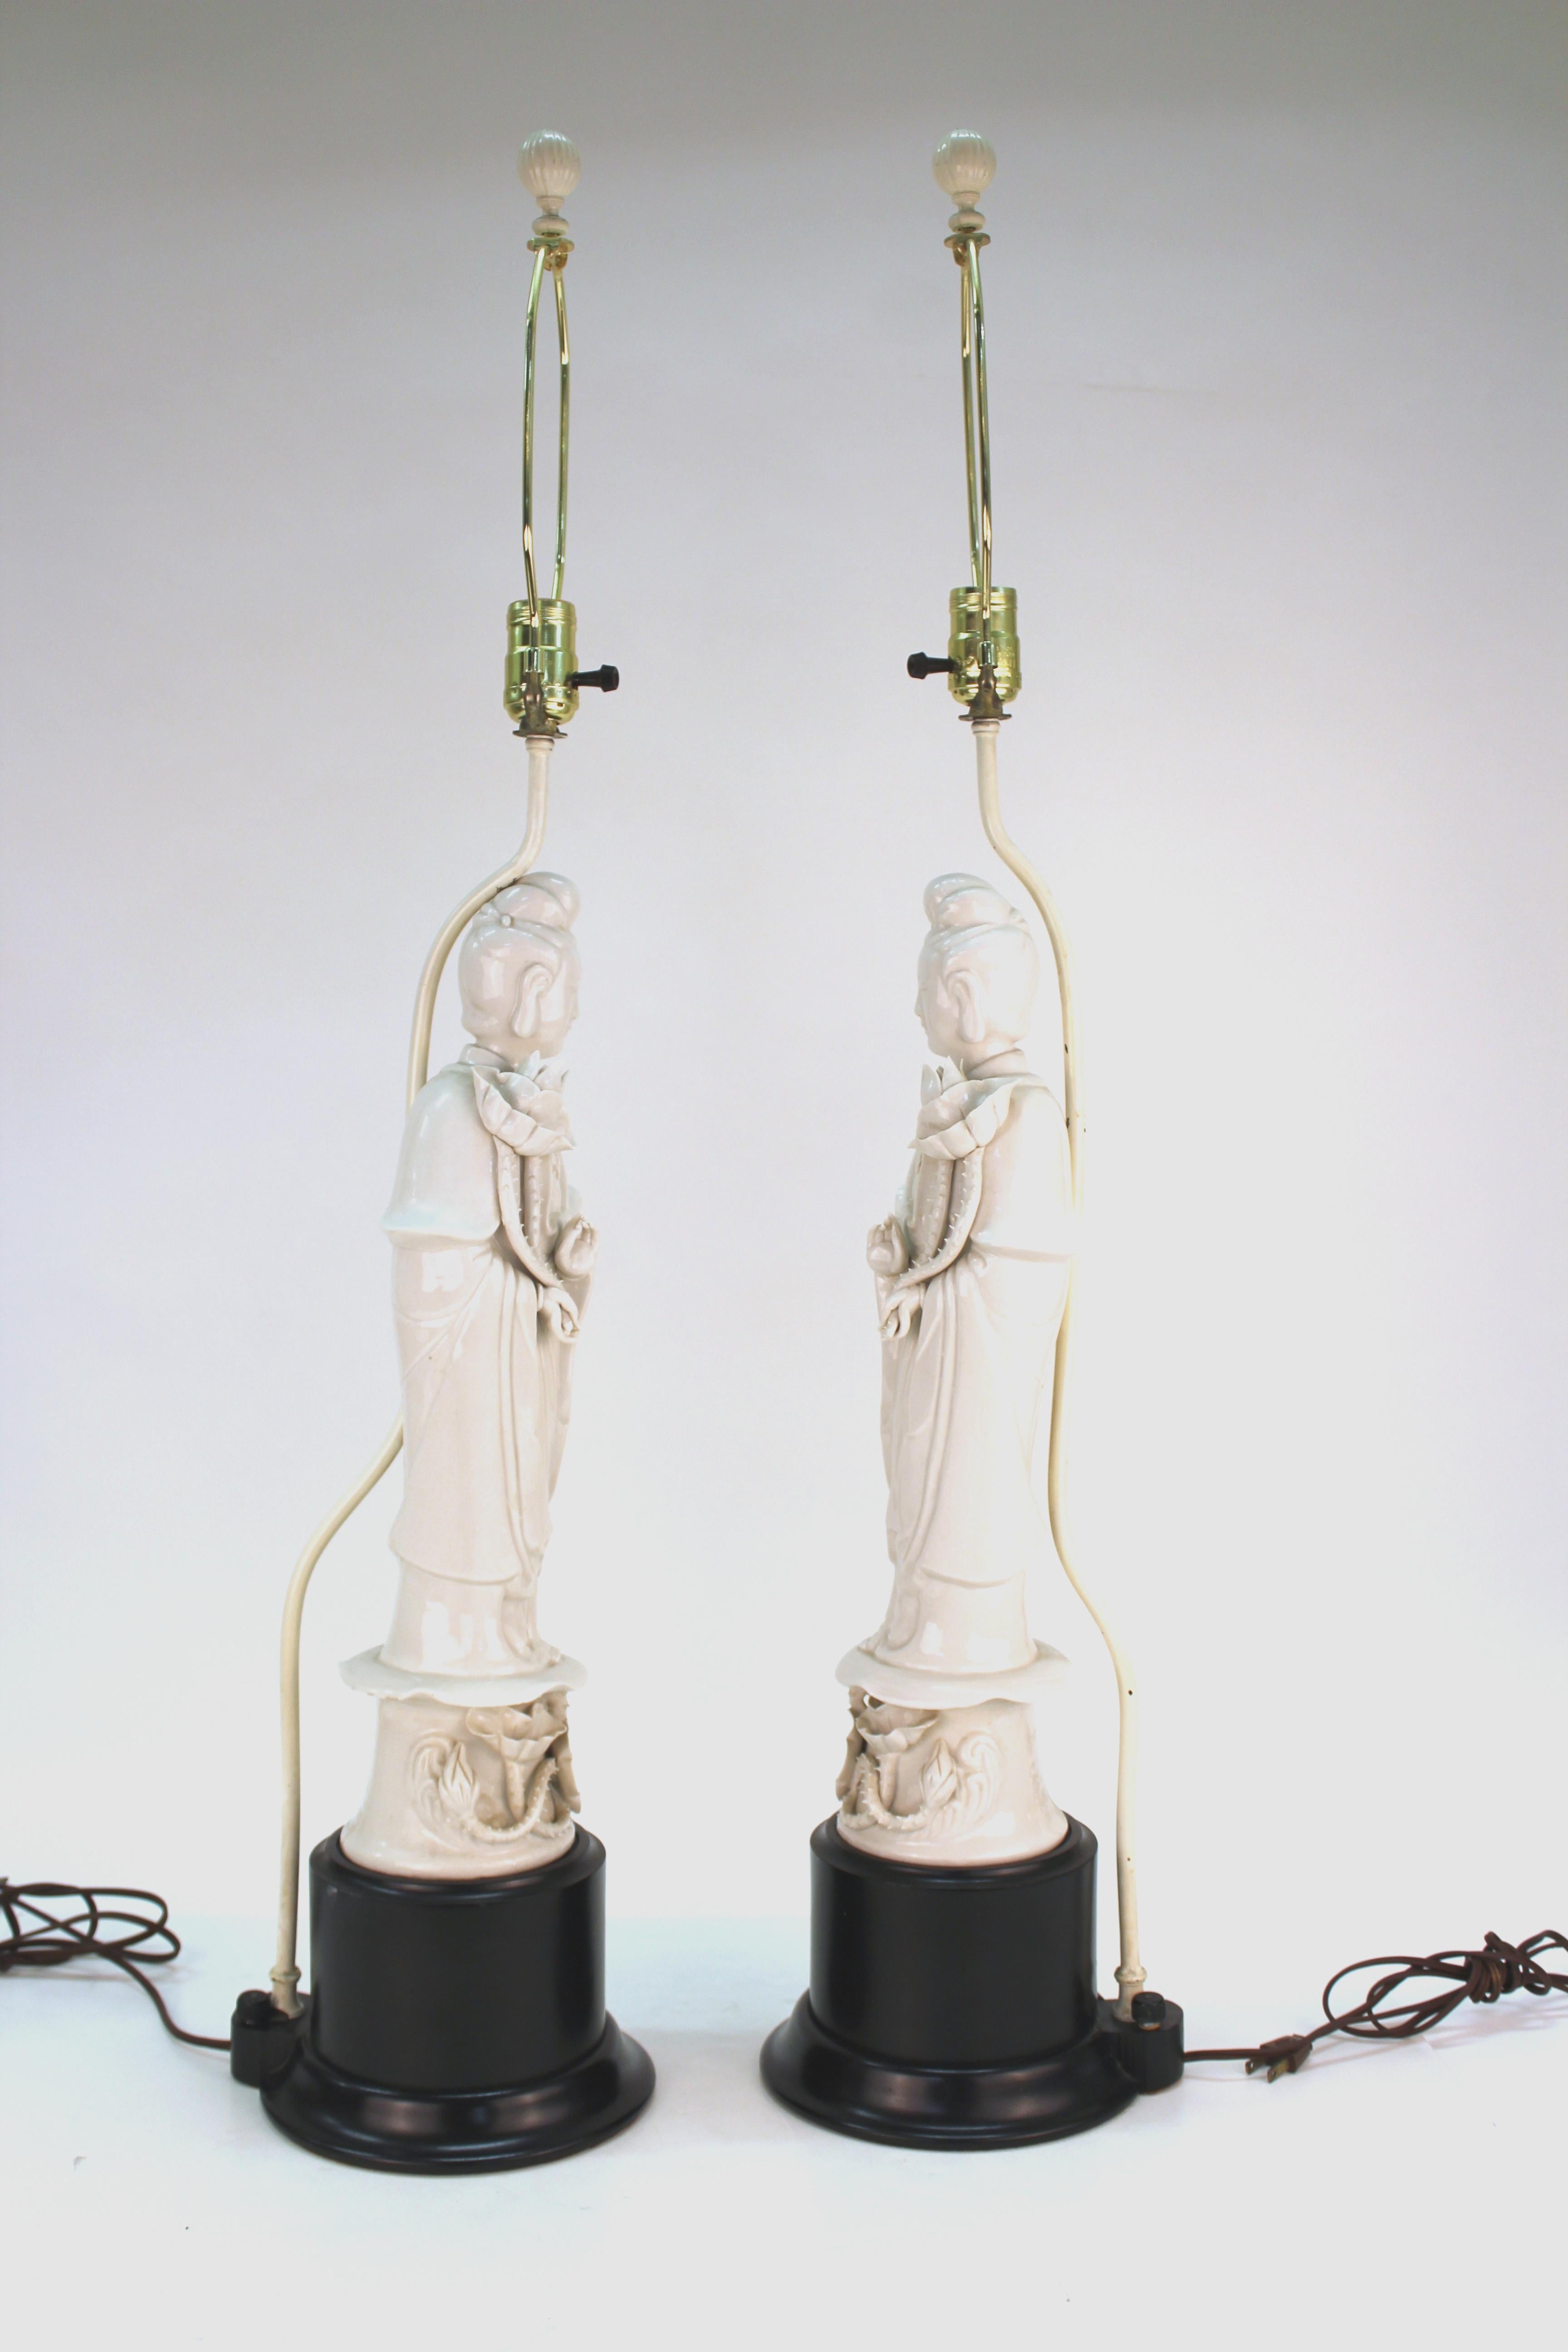 Pair of Chinese Export Guanyin Buddha table lamps in white ceramic atop black circular bases. The pair has Hong Kong marks on the back. There is some chipping to the finish on the metal pipes behind the Buddhas holding up the bulb sockets. In